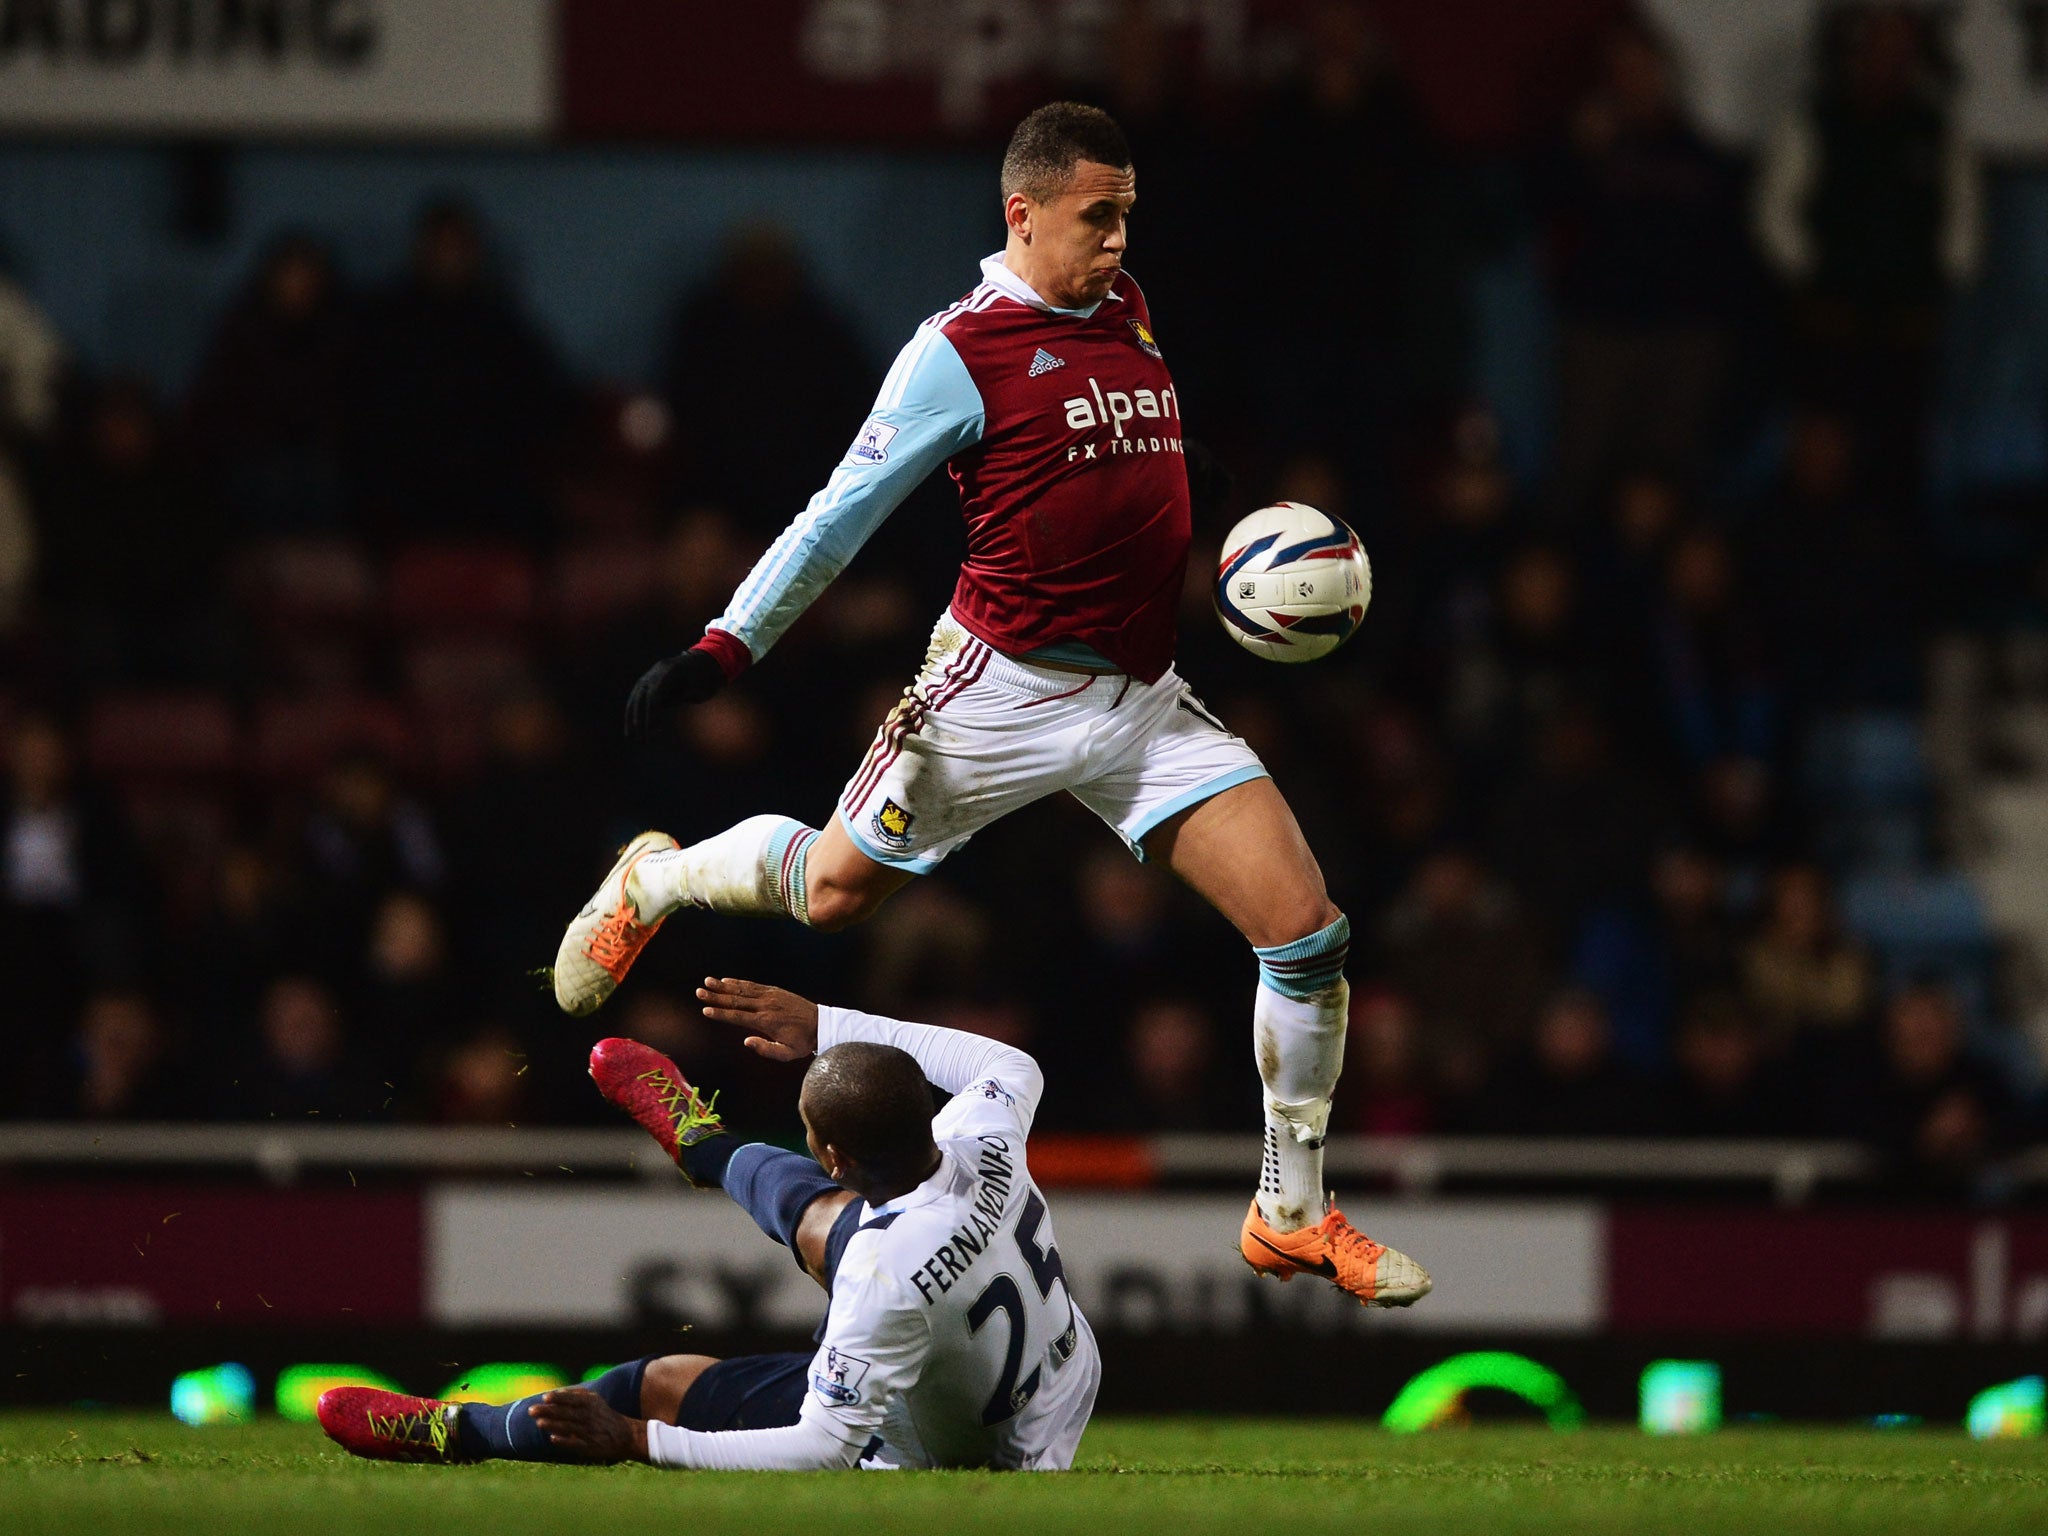 Ravel Morrison has been criticised by West Ham manager Sam Allardyce for not playing while he has suffered with a groin injury